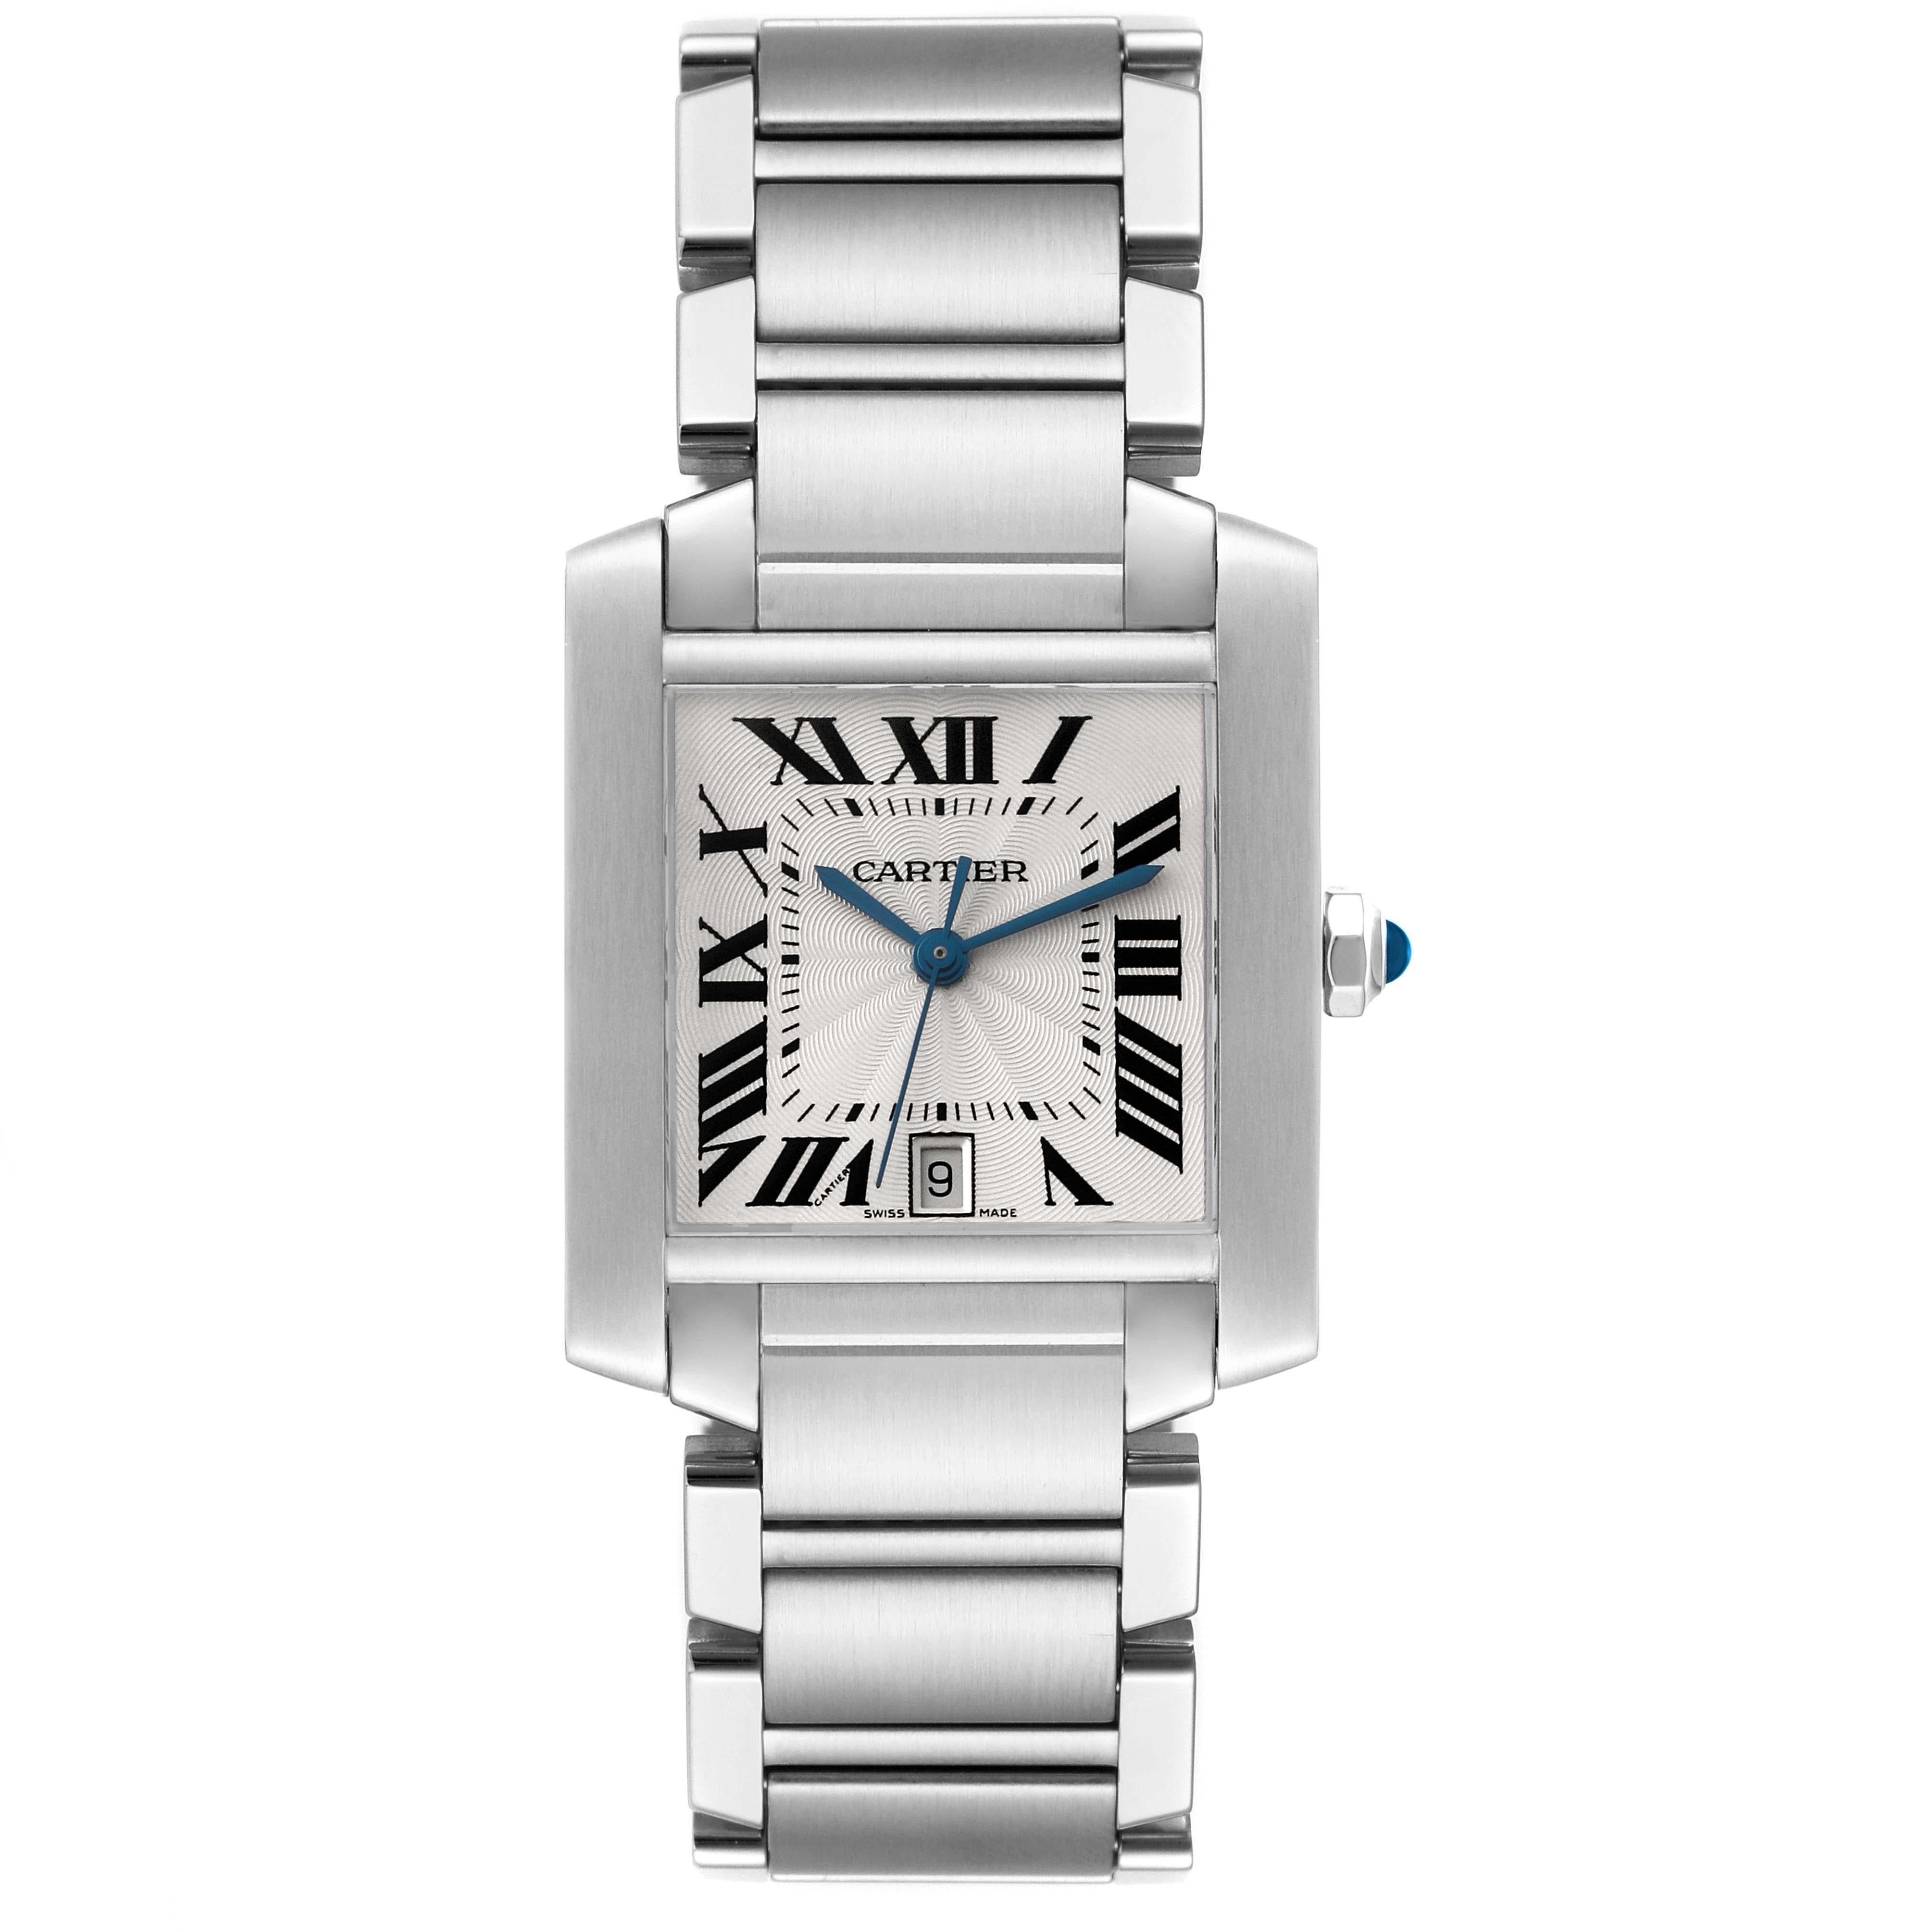 Cartier Tank Francaise Large Automatic Steel Mens Watch W51002Q3. Automatic self-winding movement. Rectangular stainless steel case 28.0 x 32.0 mm. Octagonal crown set with a blue spinel cabochon. . Scratch resistant sapphire crystal. Silver